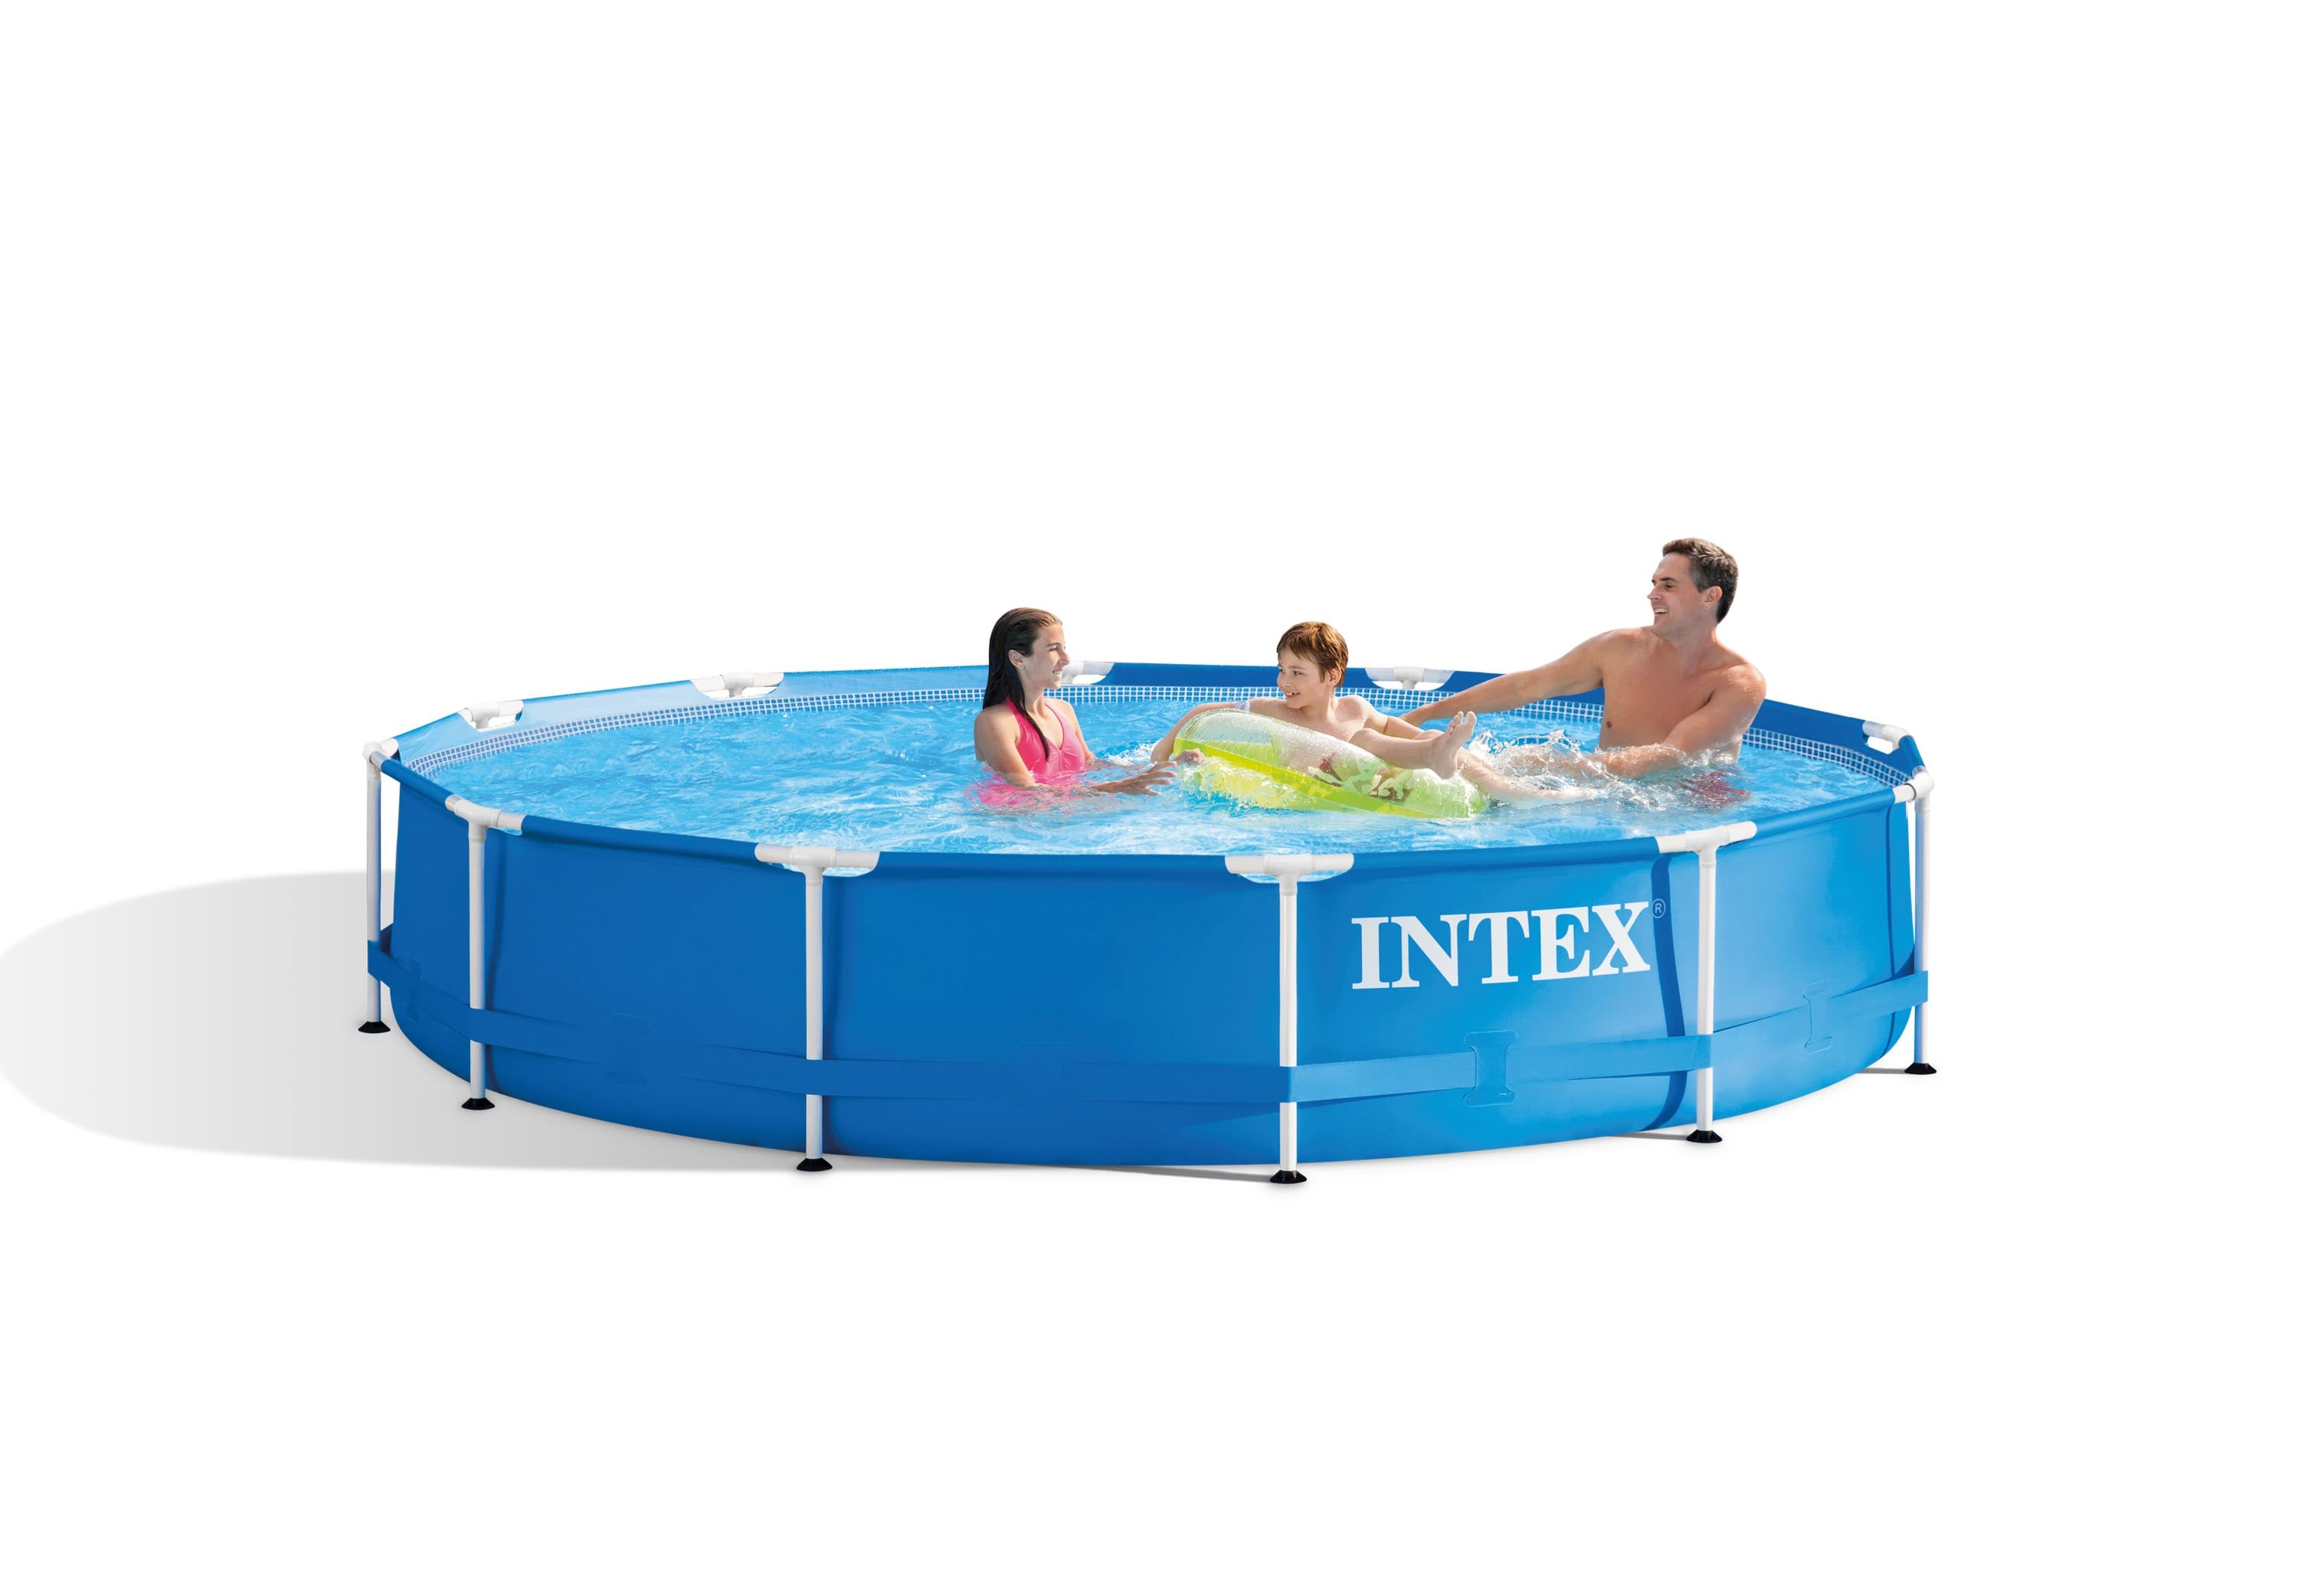 Intex 12-ft x 12-ft x 30-in Round Above-Ground the Above-Ground Pools department at Lowes.com